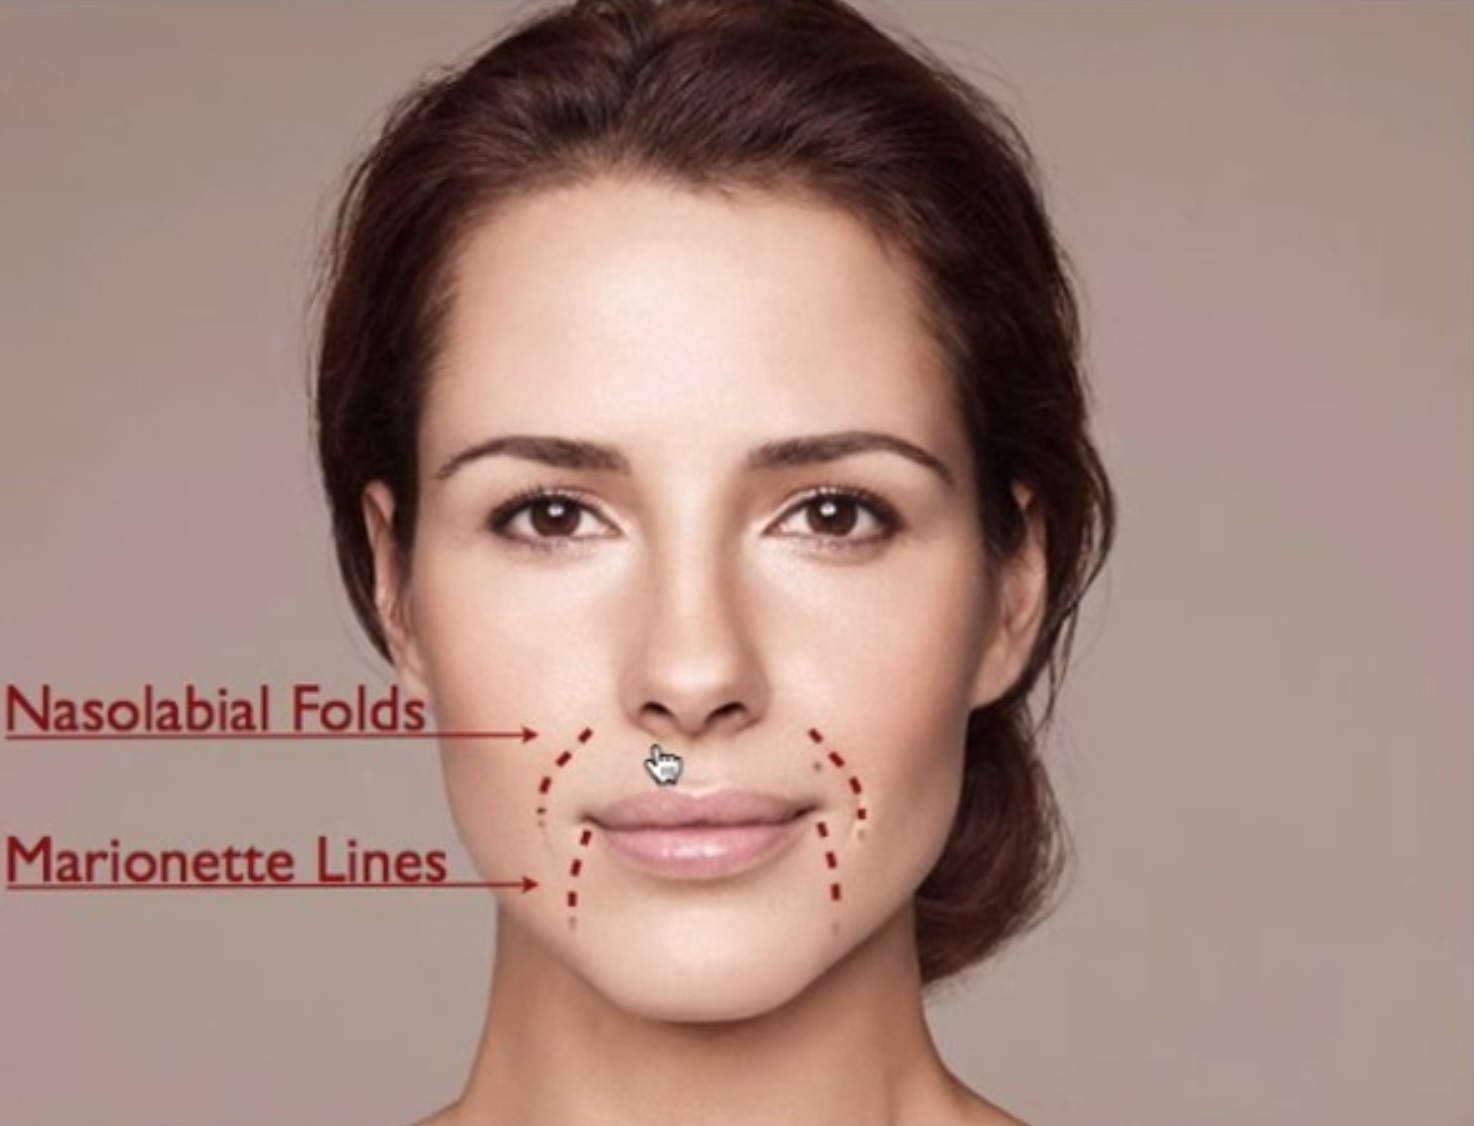 Facial exercises for marionette lines